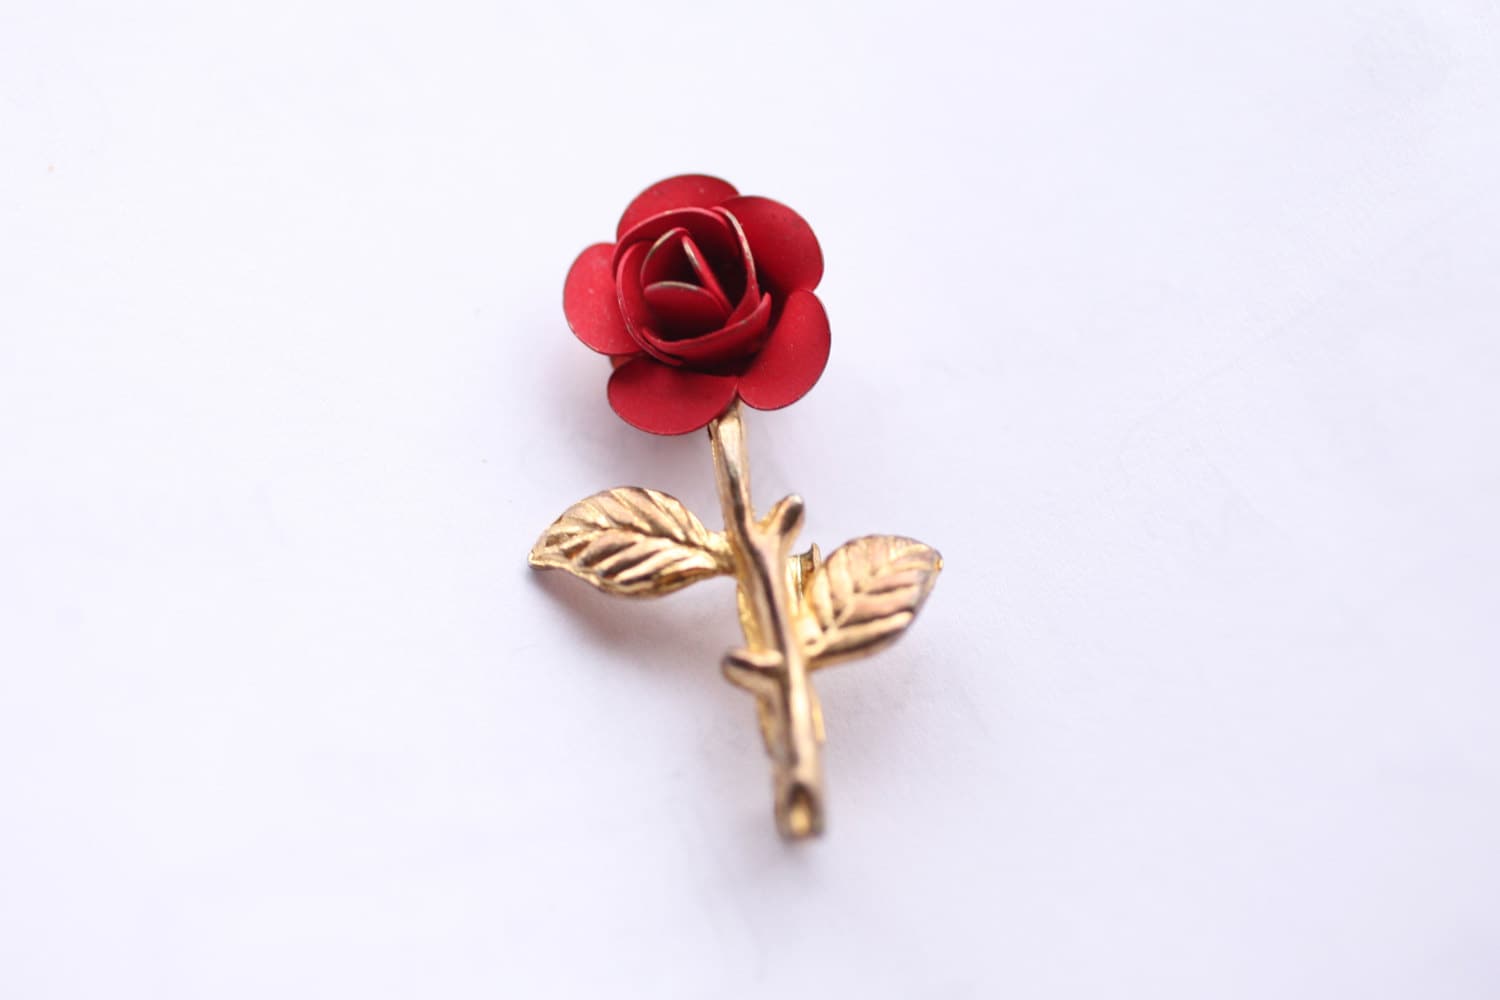 Vintage 1950s 1960s Small Red Rose Pin Metal Flower Pin